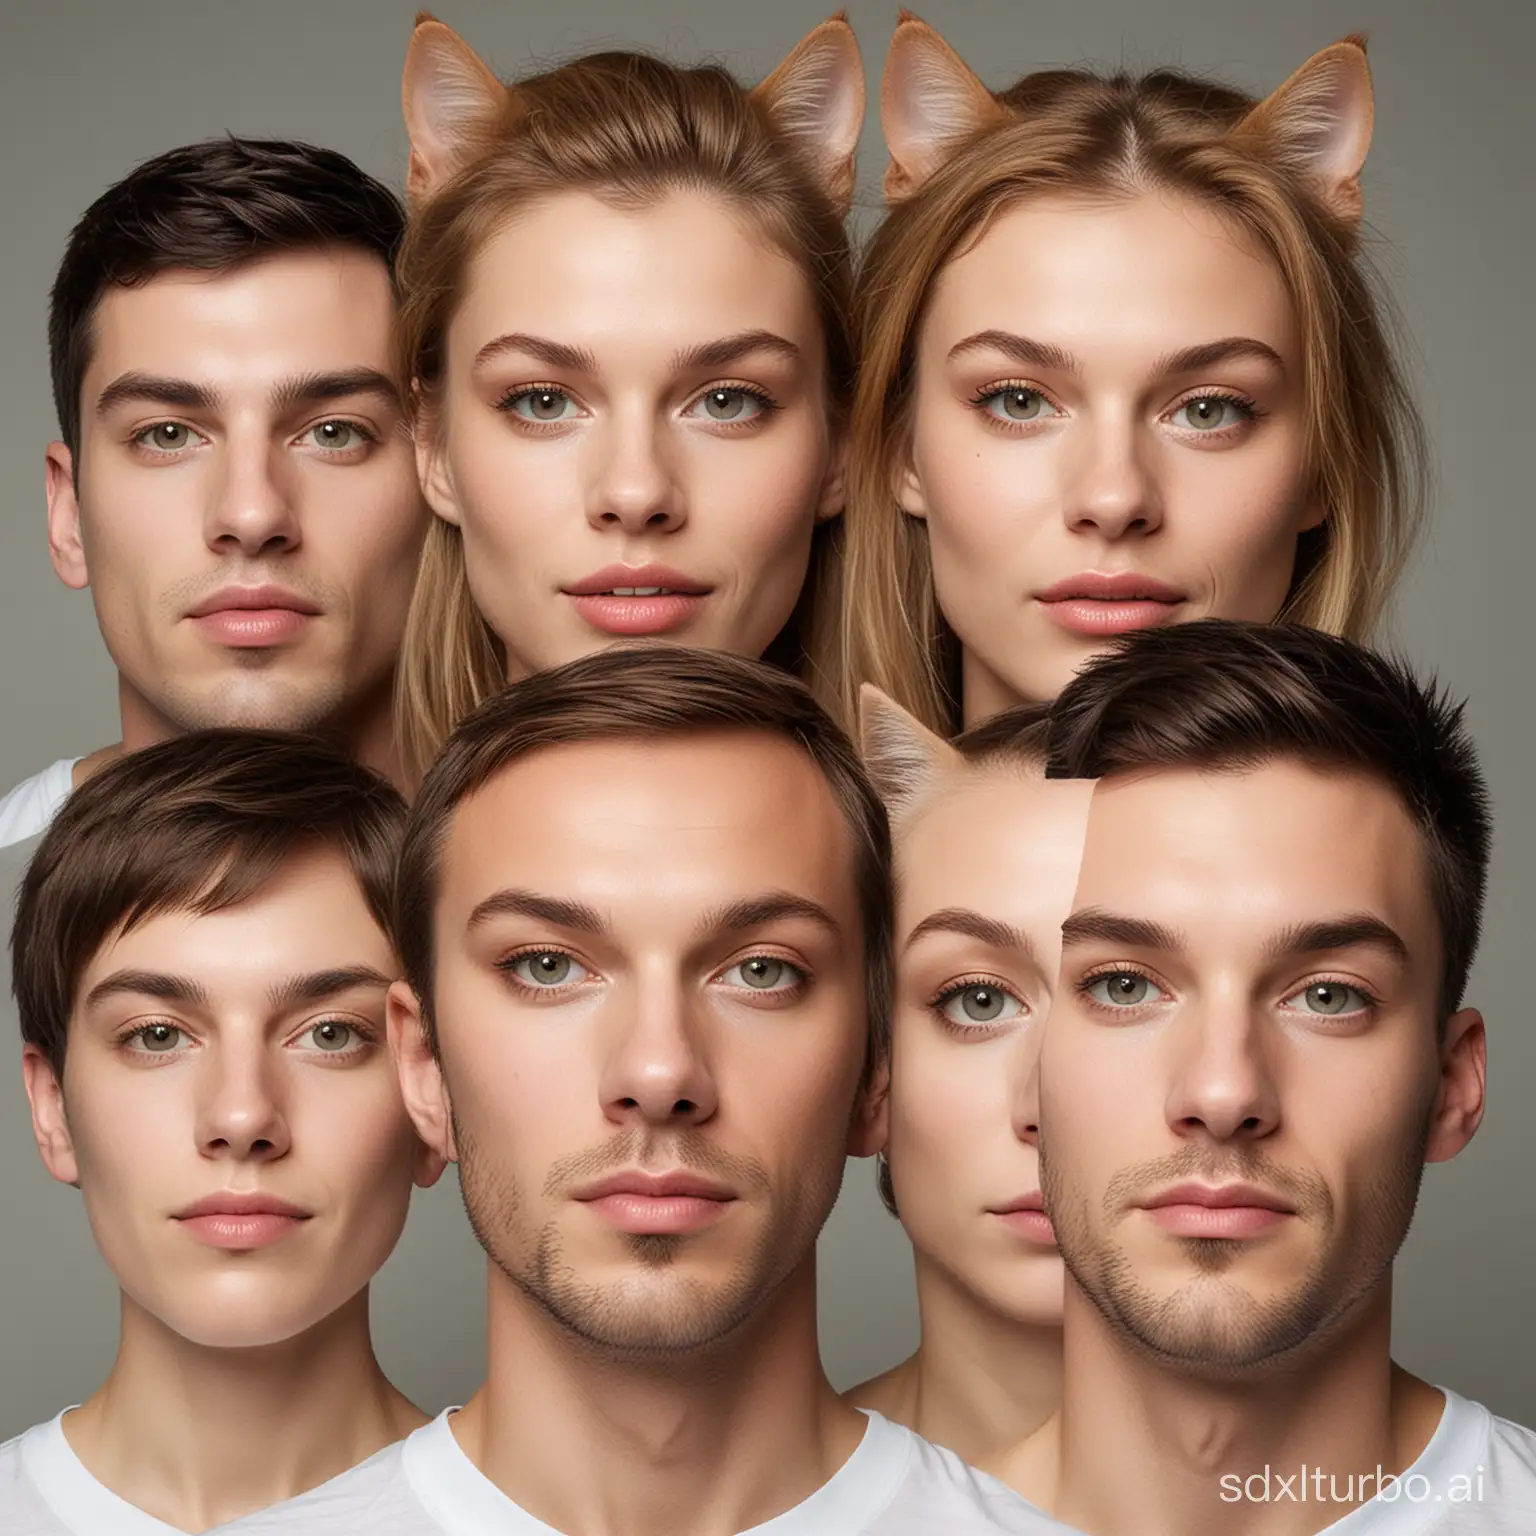 4 men and women form the face of a cat